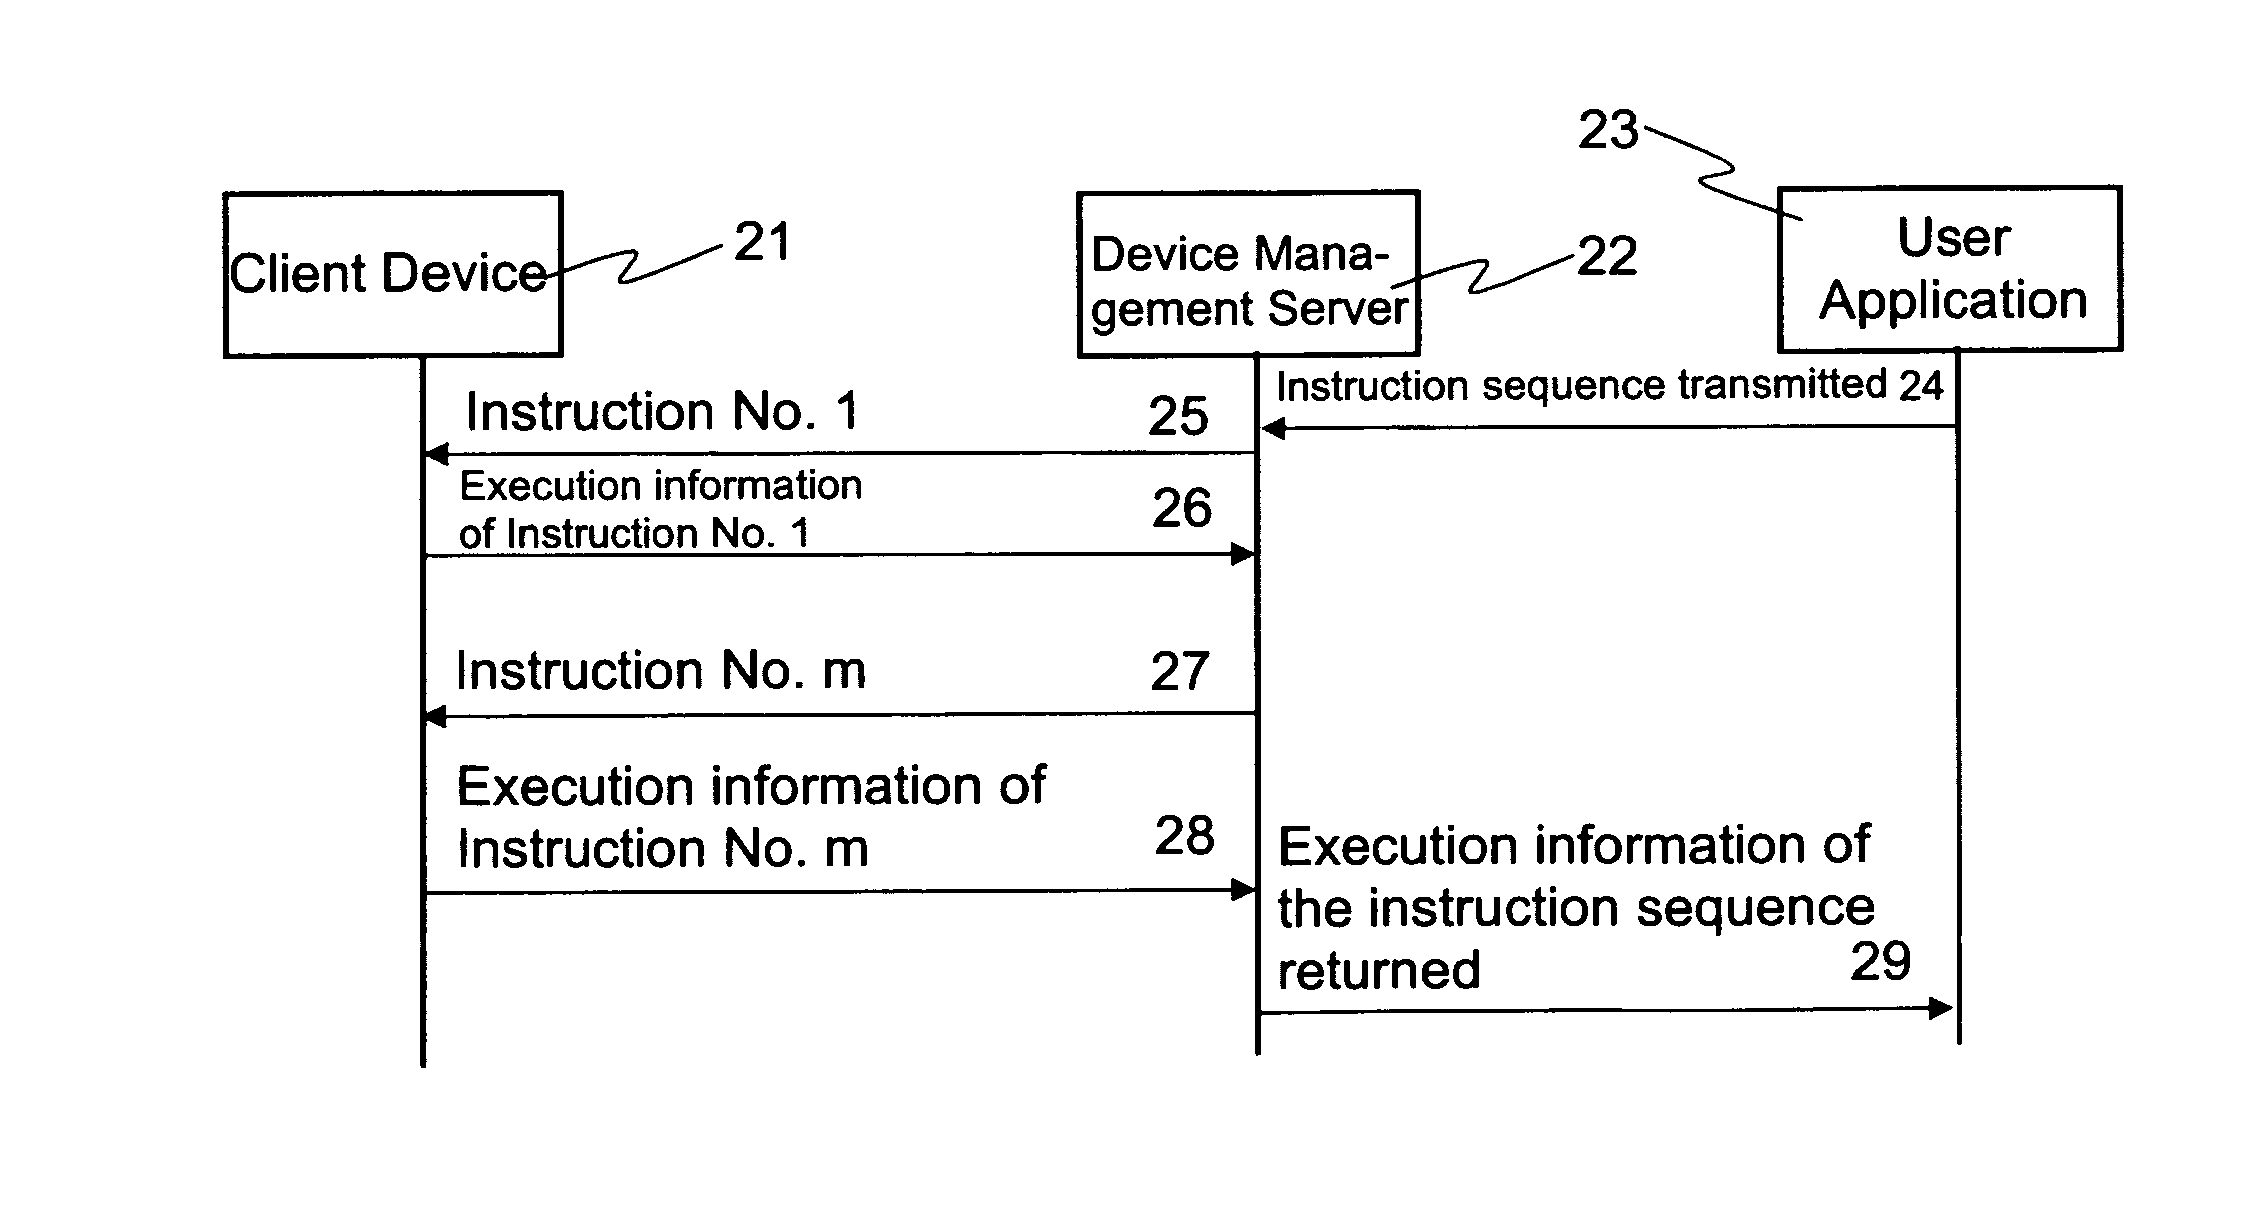 Method and device arrangement for managing a user application/device management server/client device environment